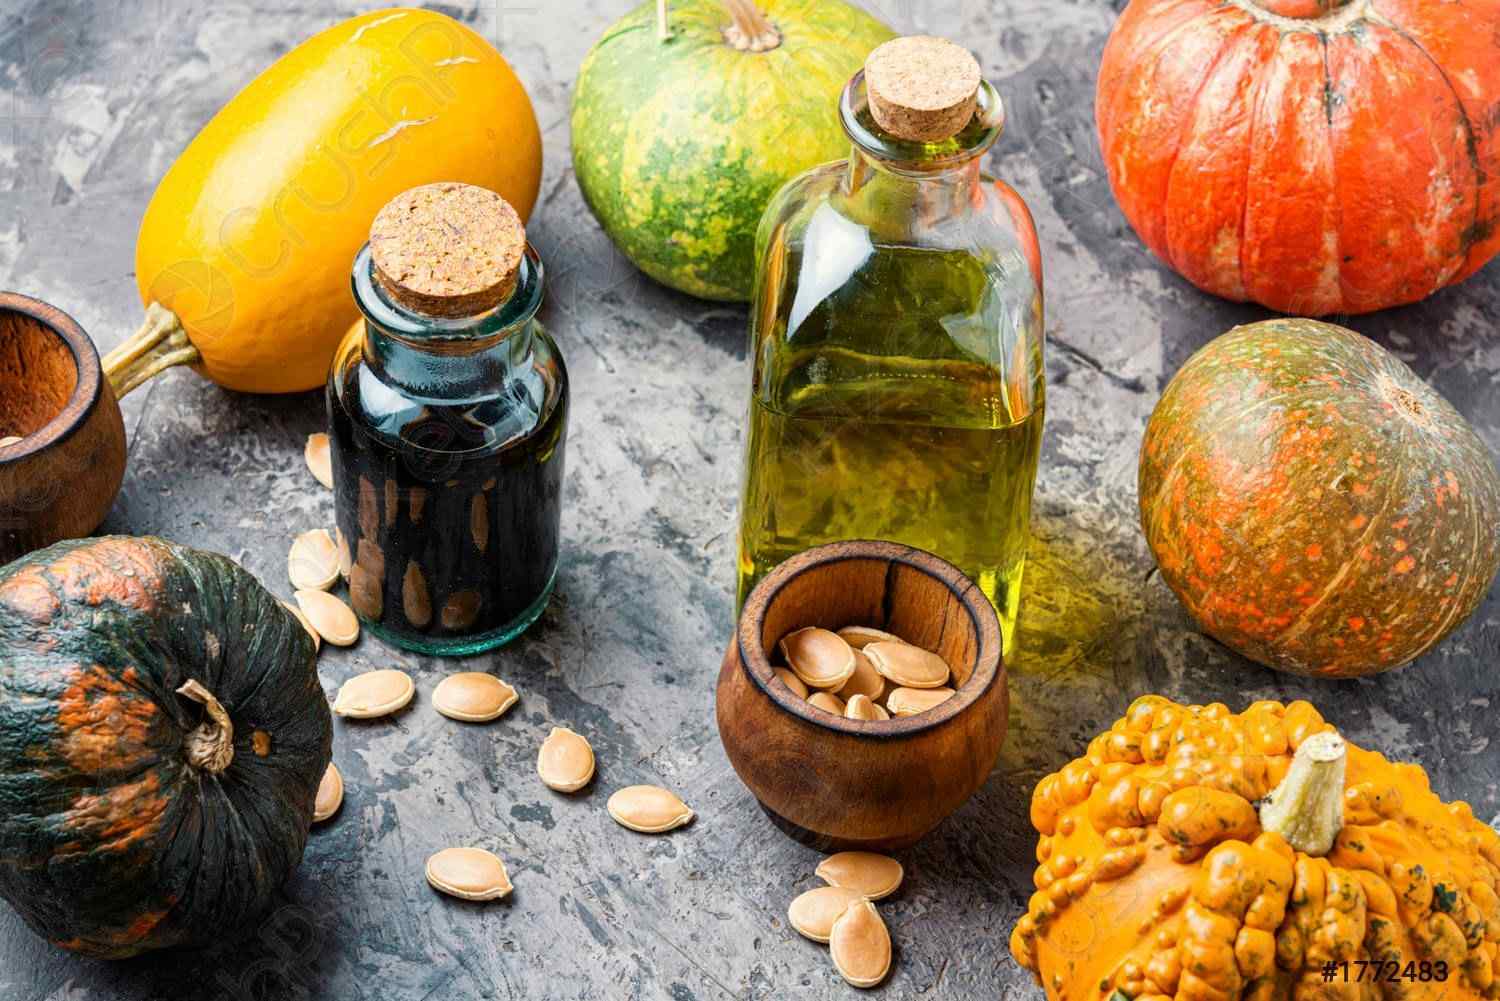 Pumpkin seed oil has a low smoke point, making it better suited for drizzling on finished dishes than high-heat cooking.